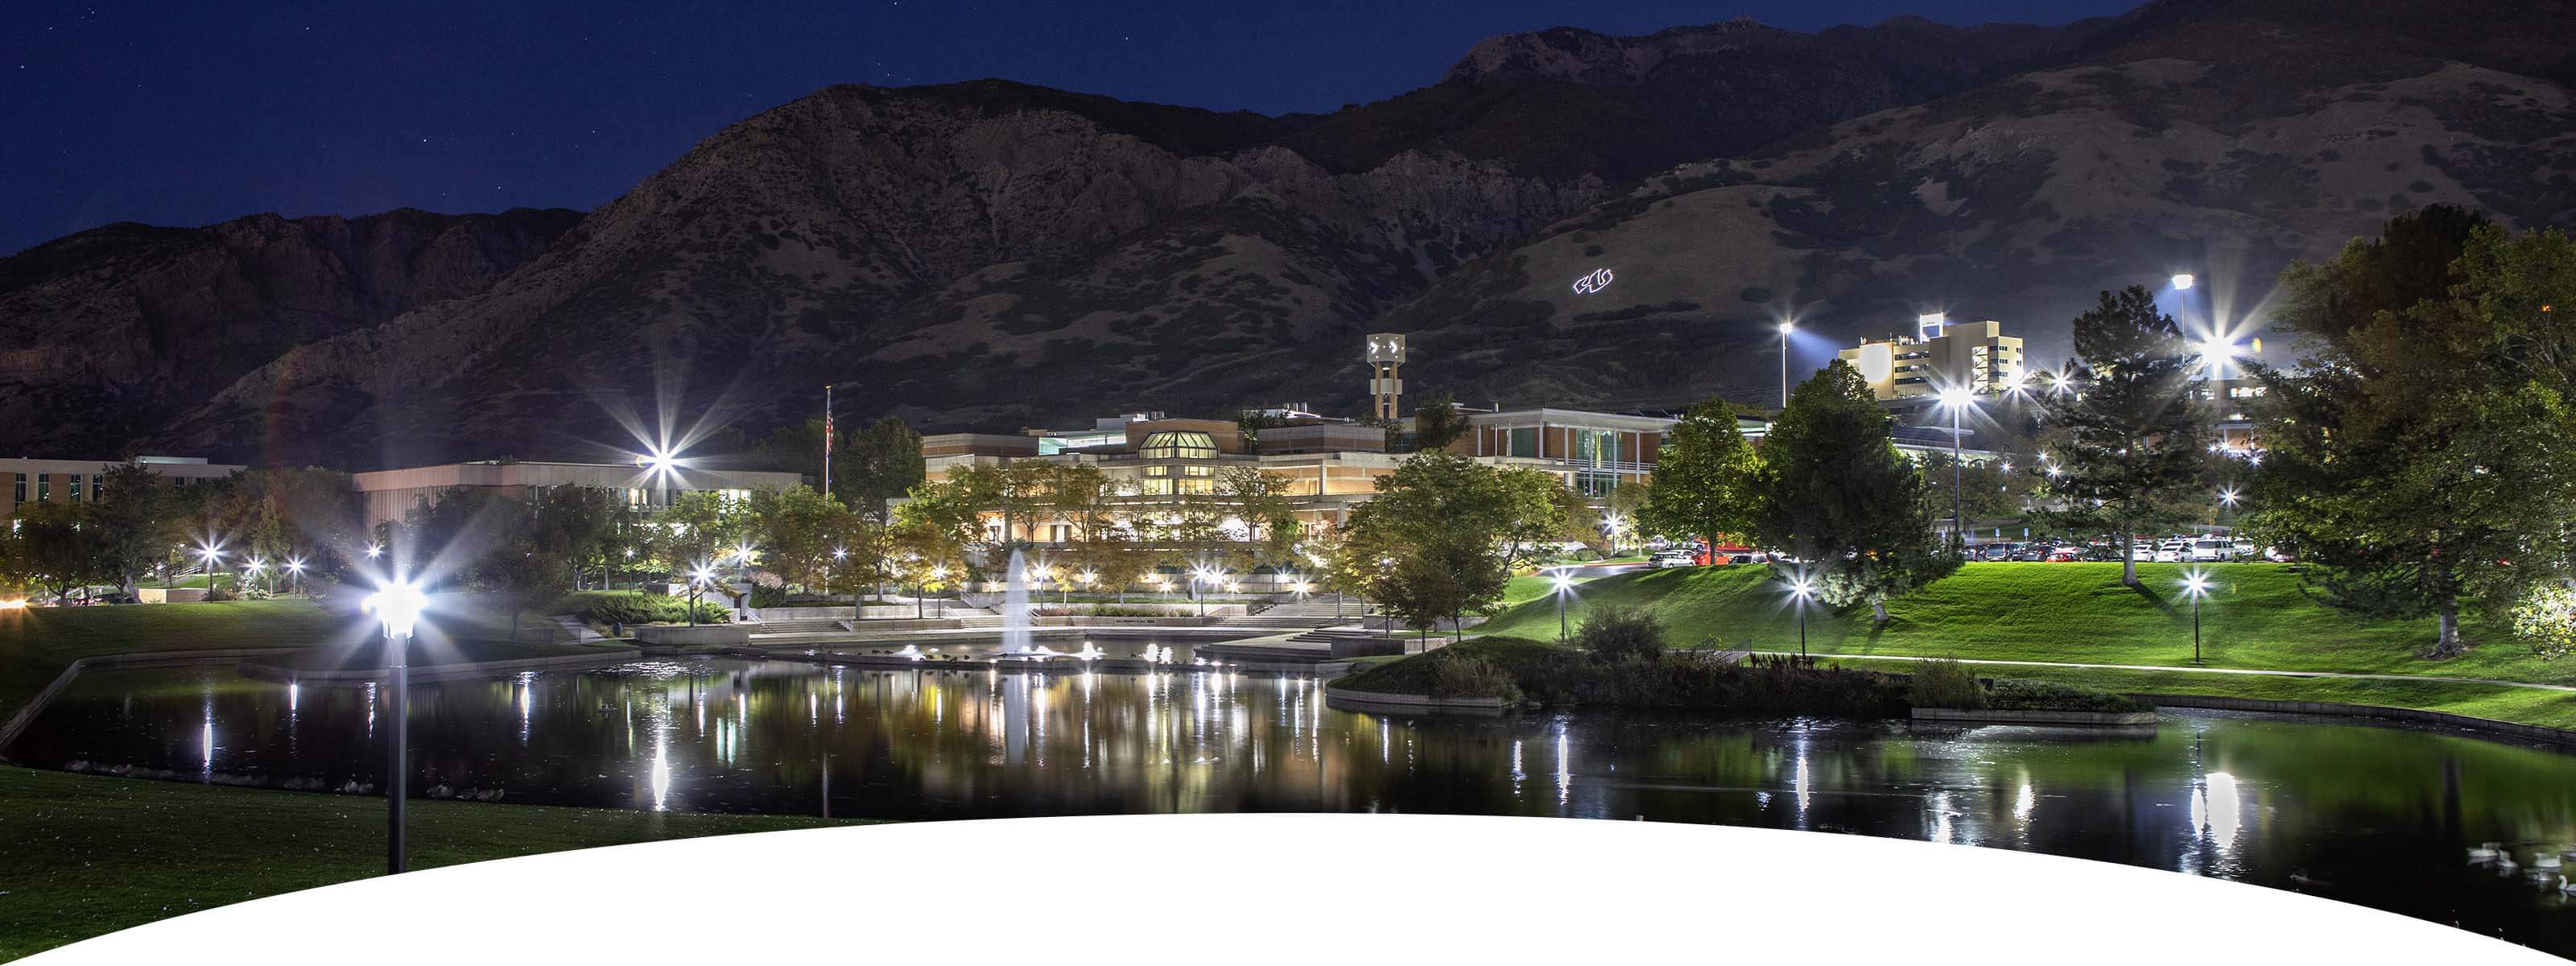 Weber State University campus at night with W lit up on hill.